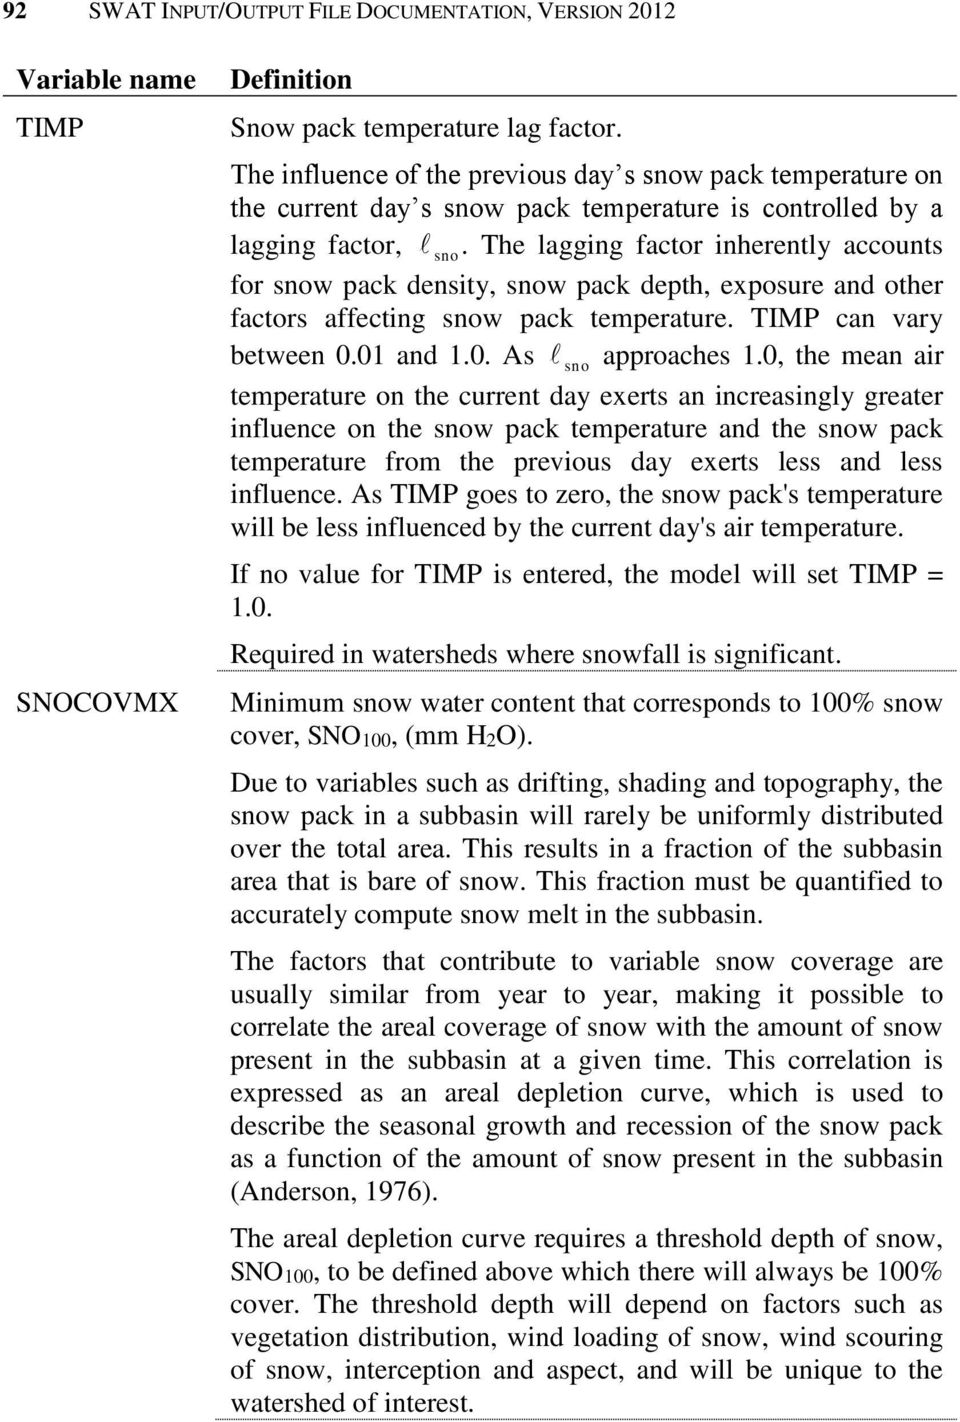 The lagging factor inherently accounts for snow pack density, snow pack depth, exposure and other factors affecting snow pack temperature. TIMP can vary between 0.01 and 1.0. As sno approaches 1.